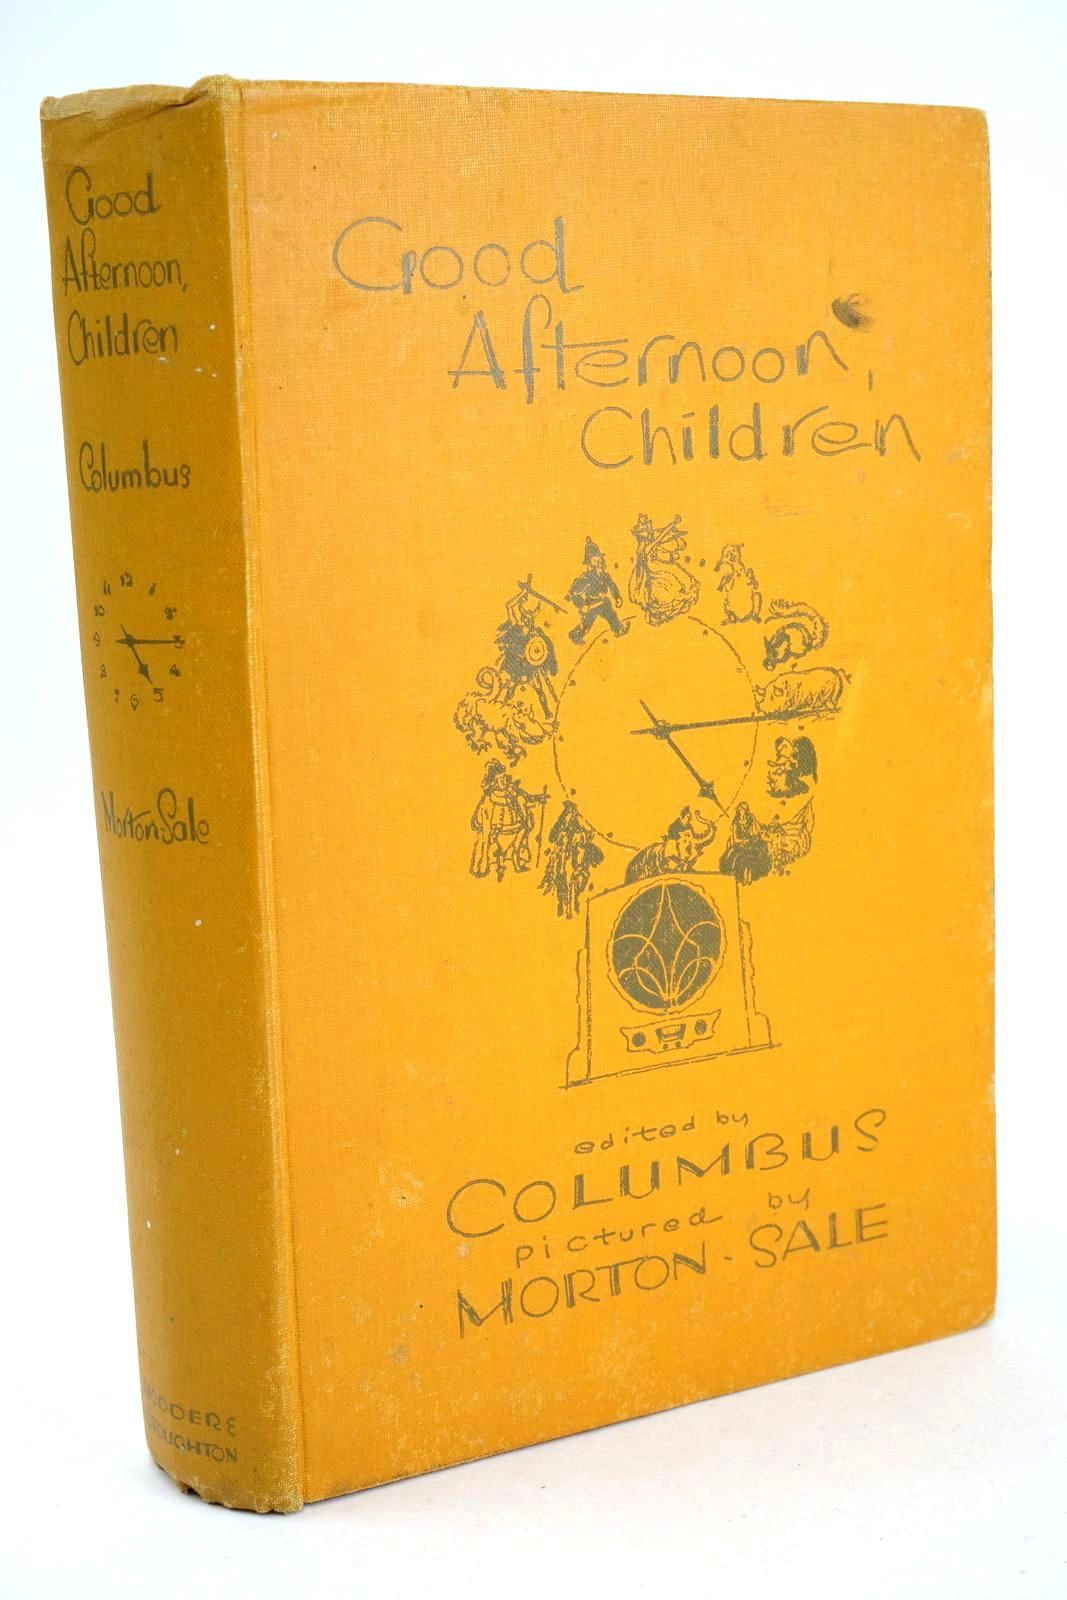 Photo of GOOD AFTERNOON, CHILDREN written by Columbus,  illustrated by Morton-Sale, John published by Hodder &amp; Stoughton (STOCK CODE: 1326240)  for sale by Stella & Rose's Books